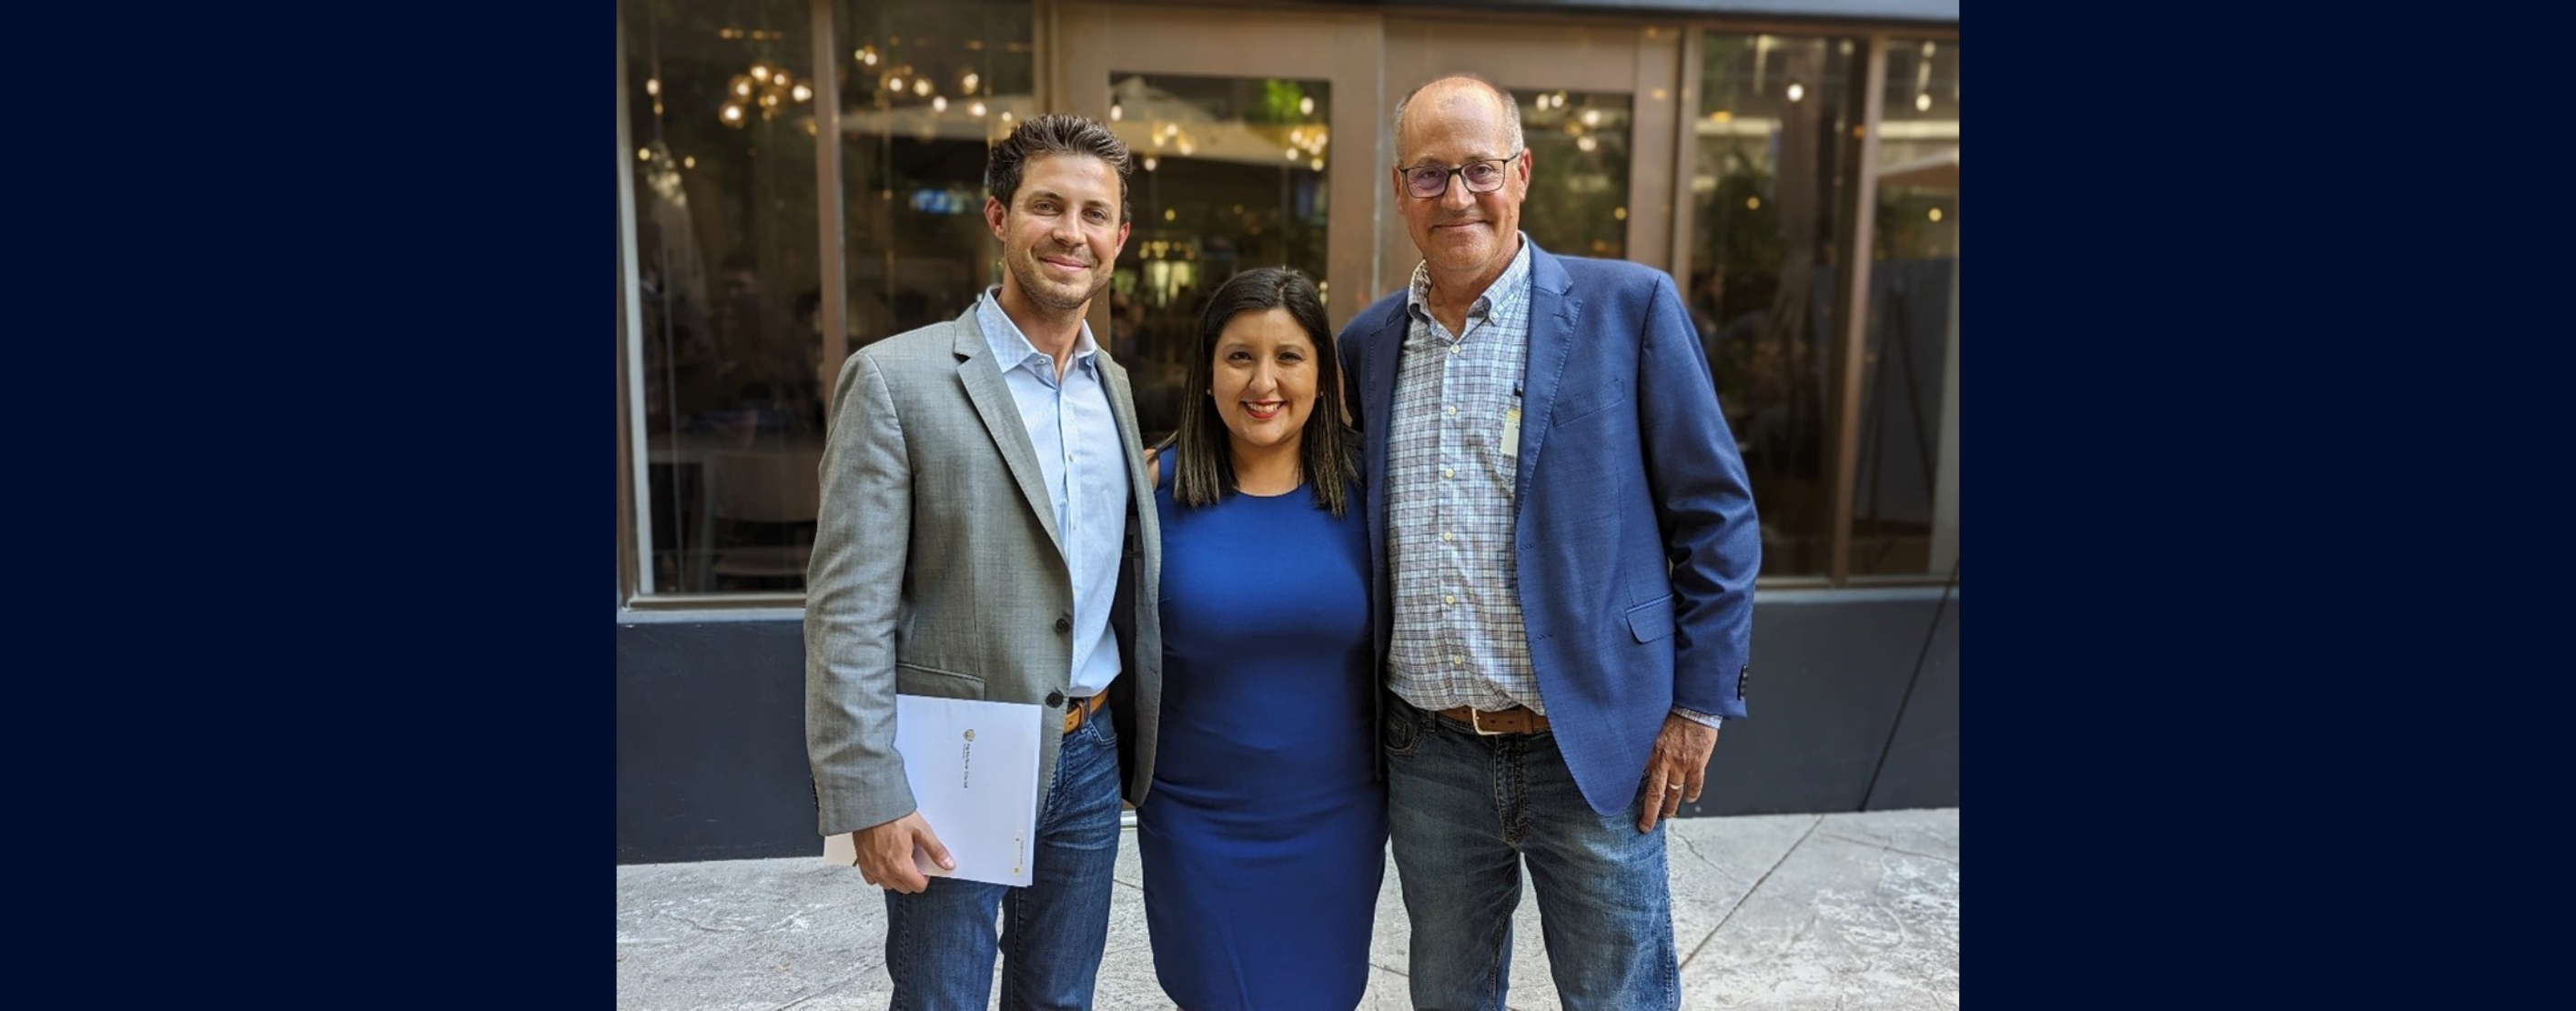 Land O’Lakes member-owners Jared Fernandes and Preston Fernandes with California State Senator Melissa Hurtado (SD-16).